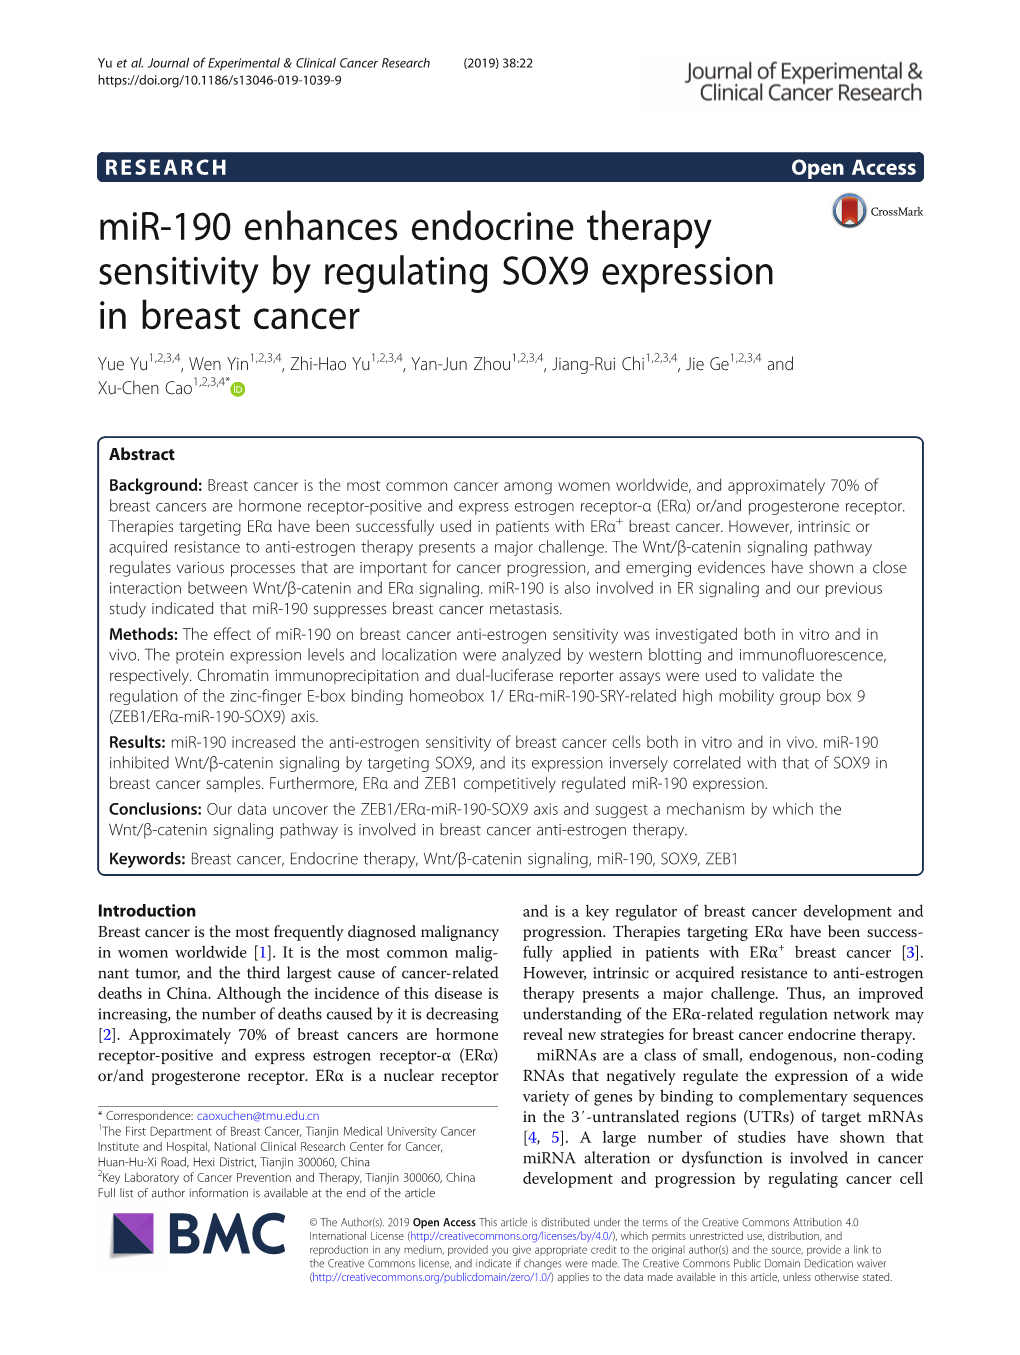 Mir-190 Enhances Endocrine Therapy Sensitivity by Regulating SOX9